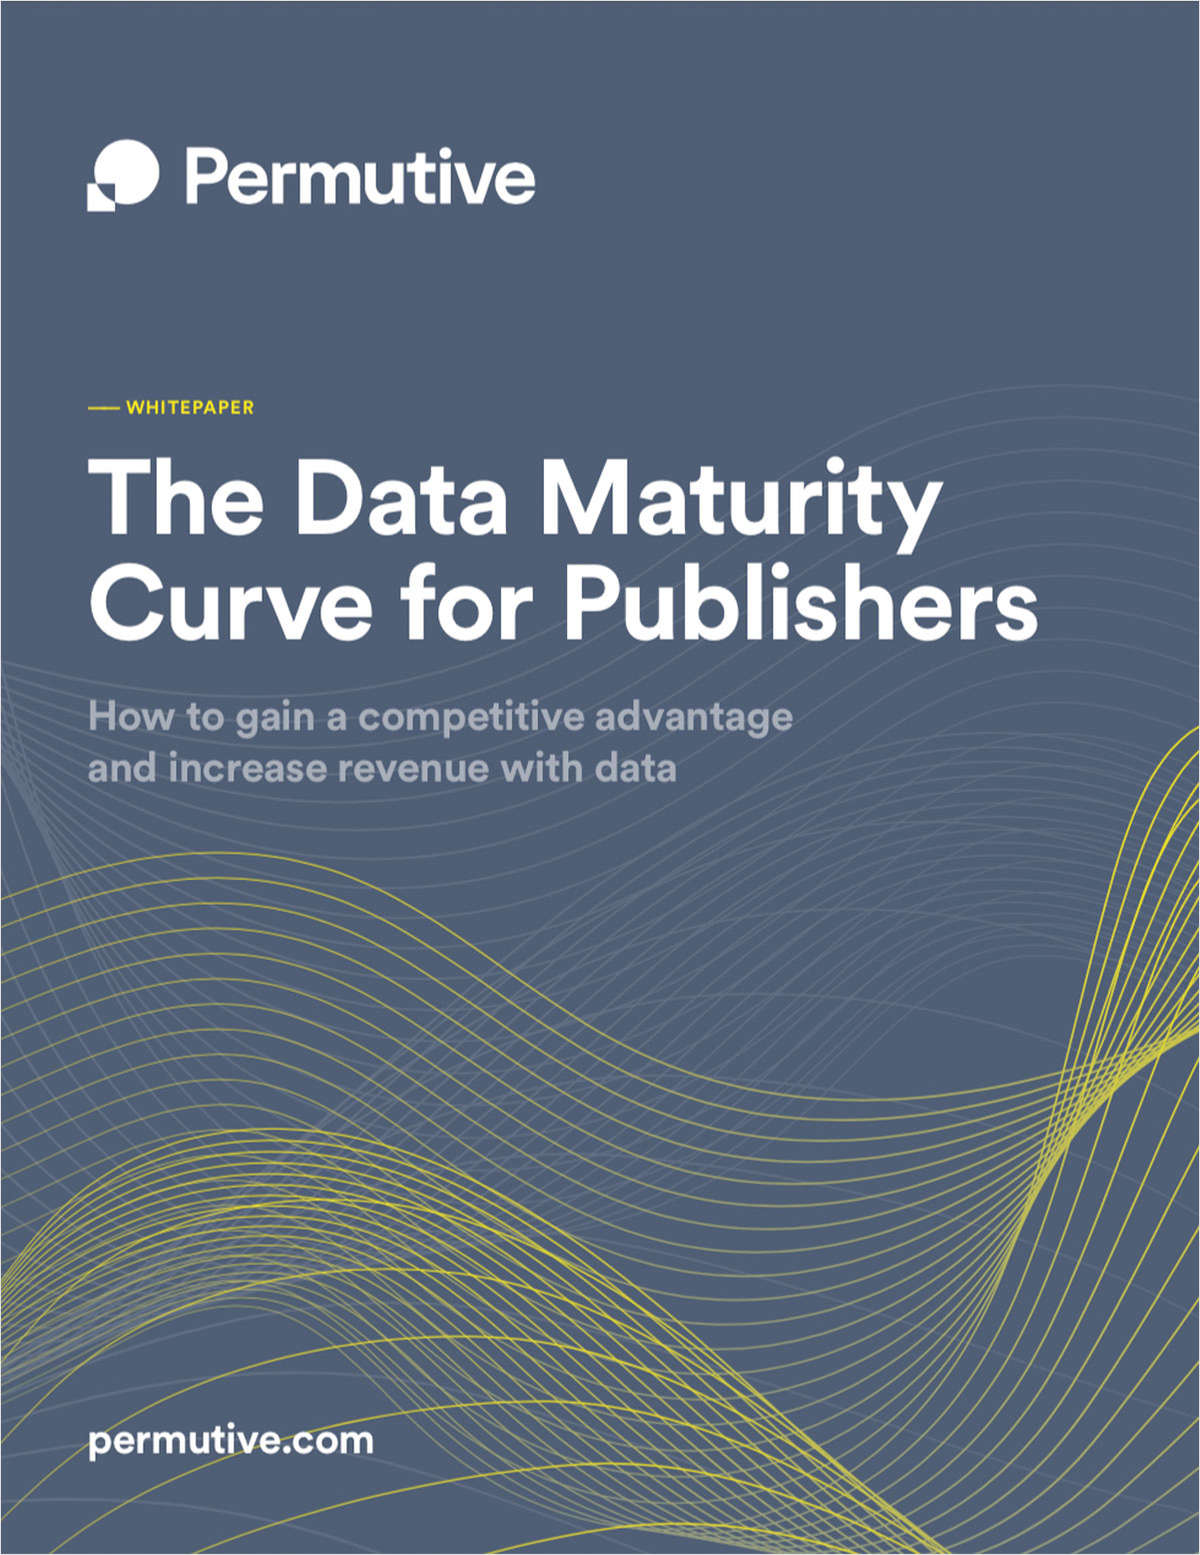 The Data Maturity Curve for Publishers